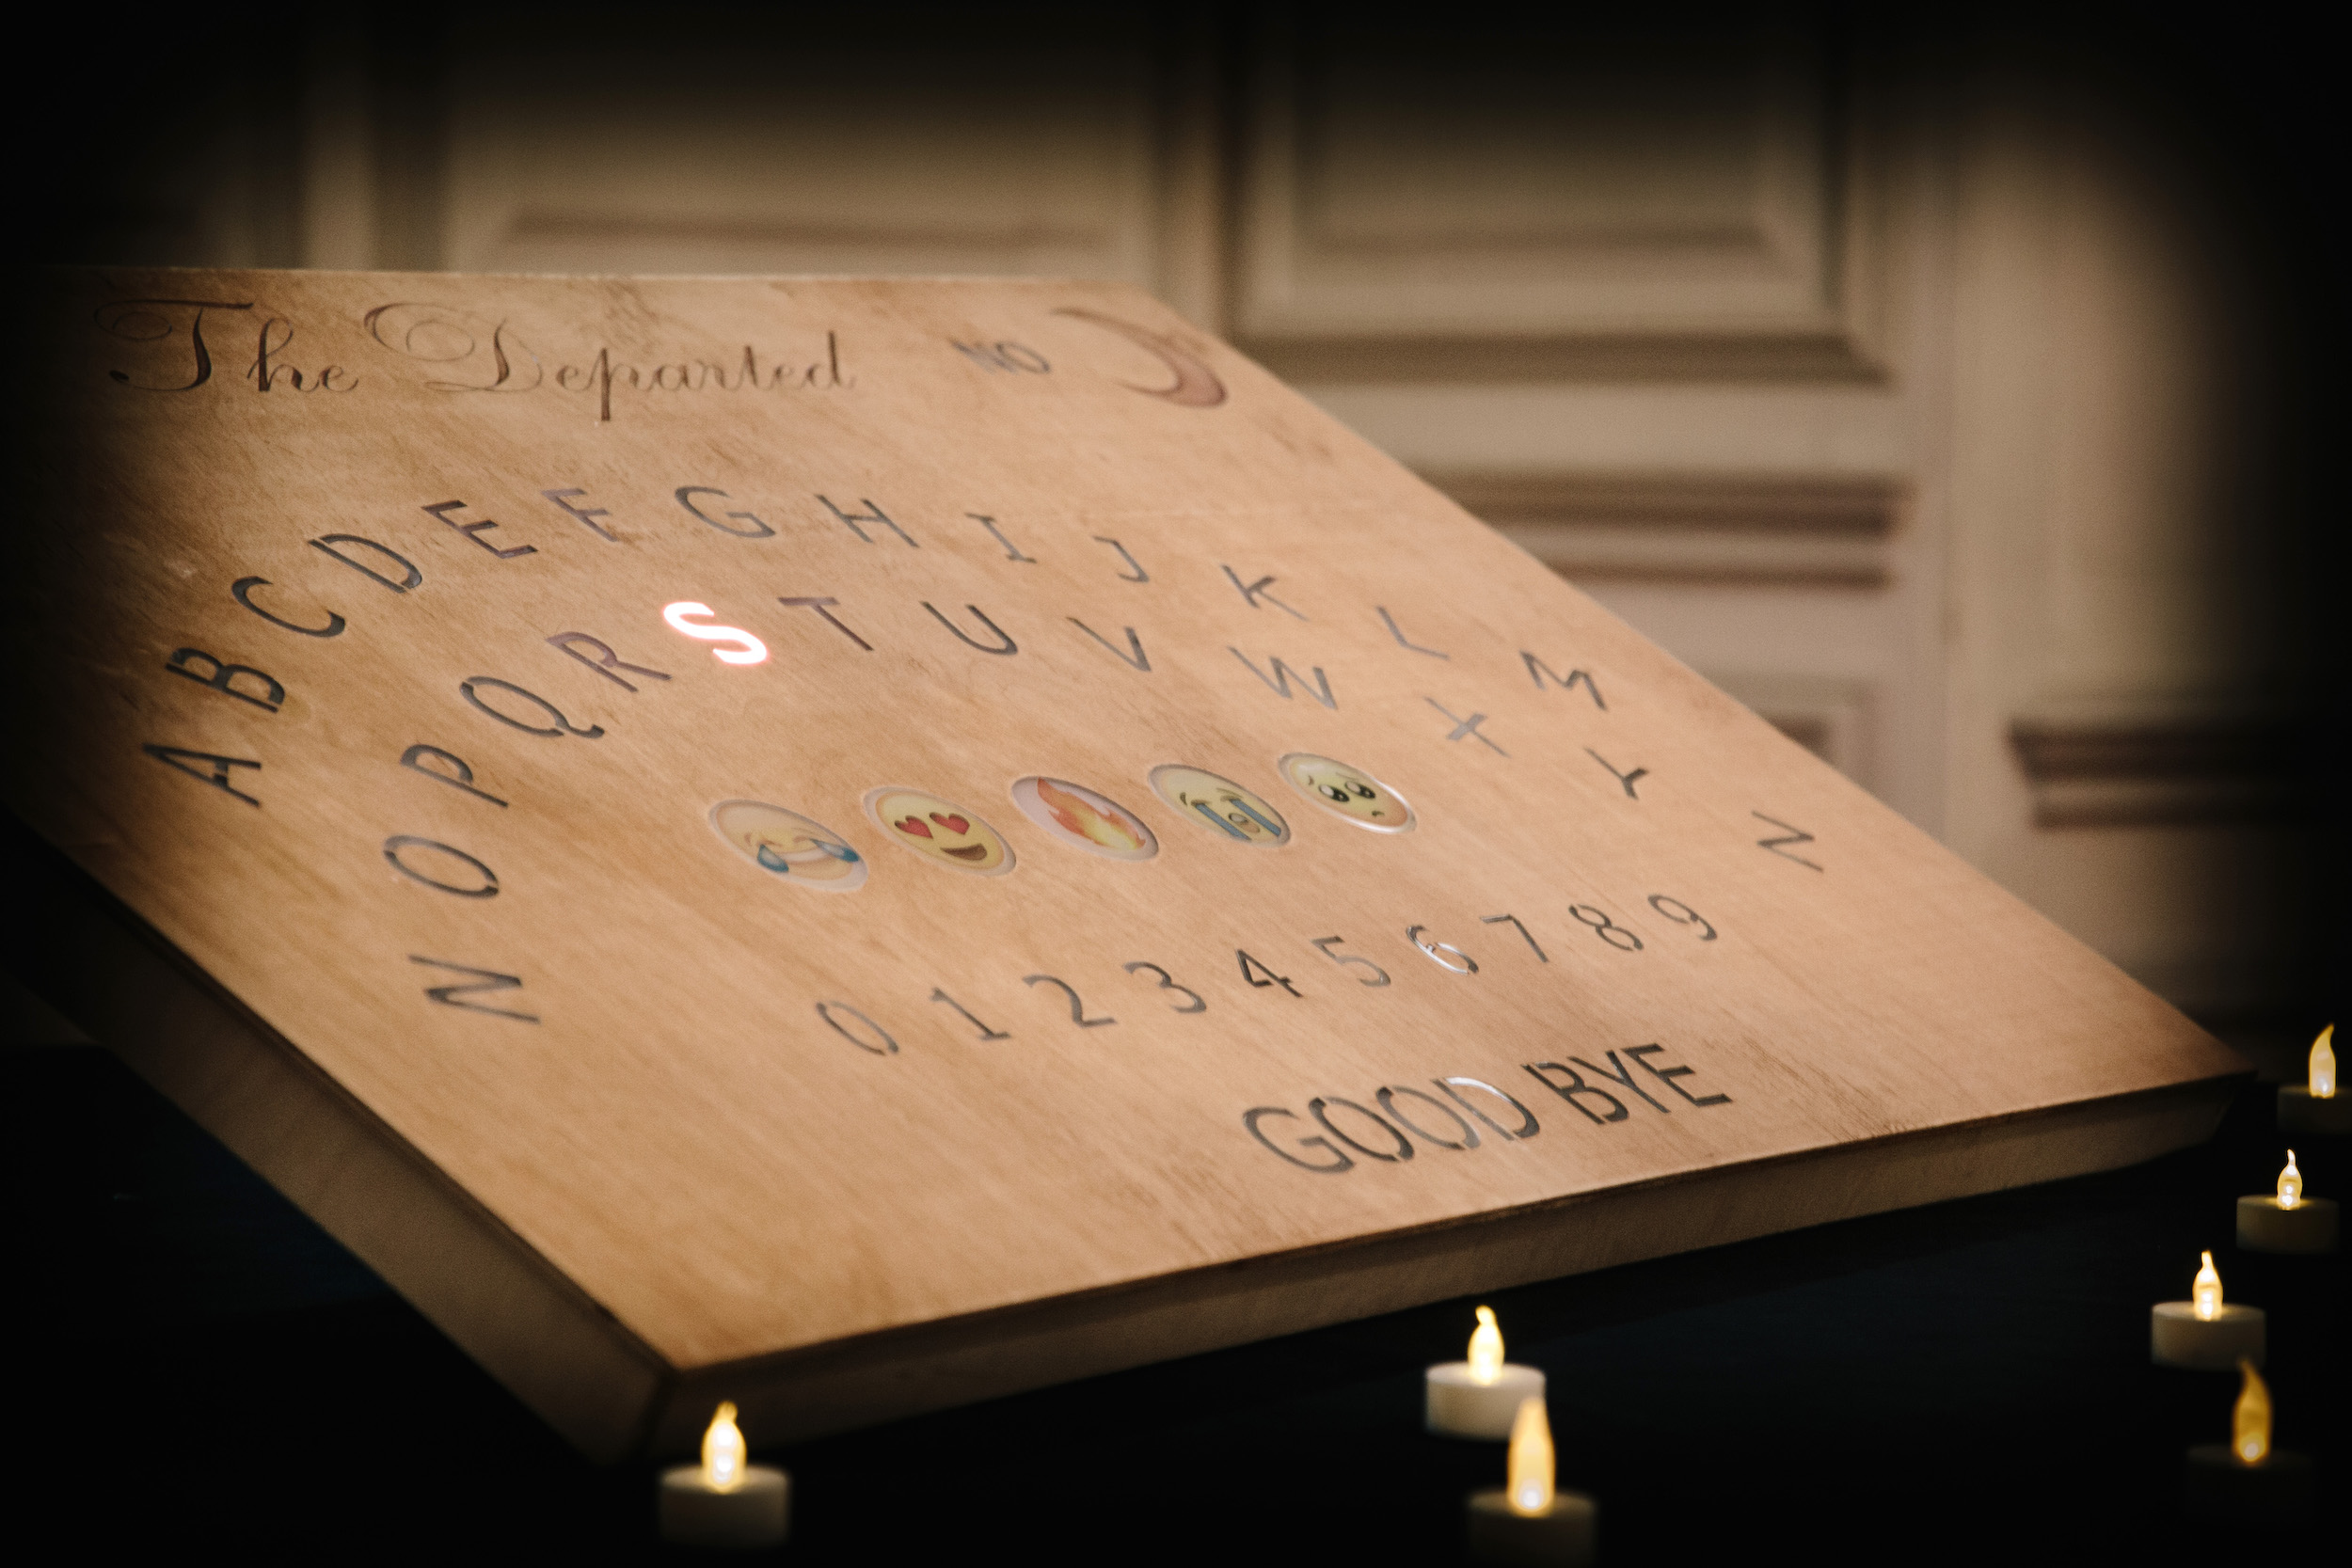 Close up of a wooden ouija board with the alphabet laid out in an arch, numbers 0 to 9, five emojis, and 'goodbye' written at the bottom. The letter 'S' is illuminated red.